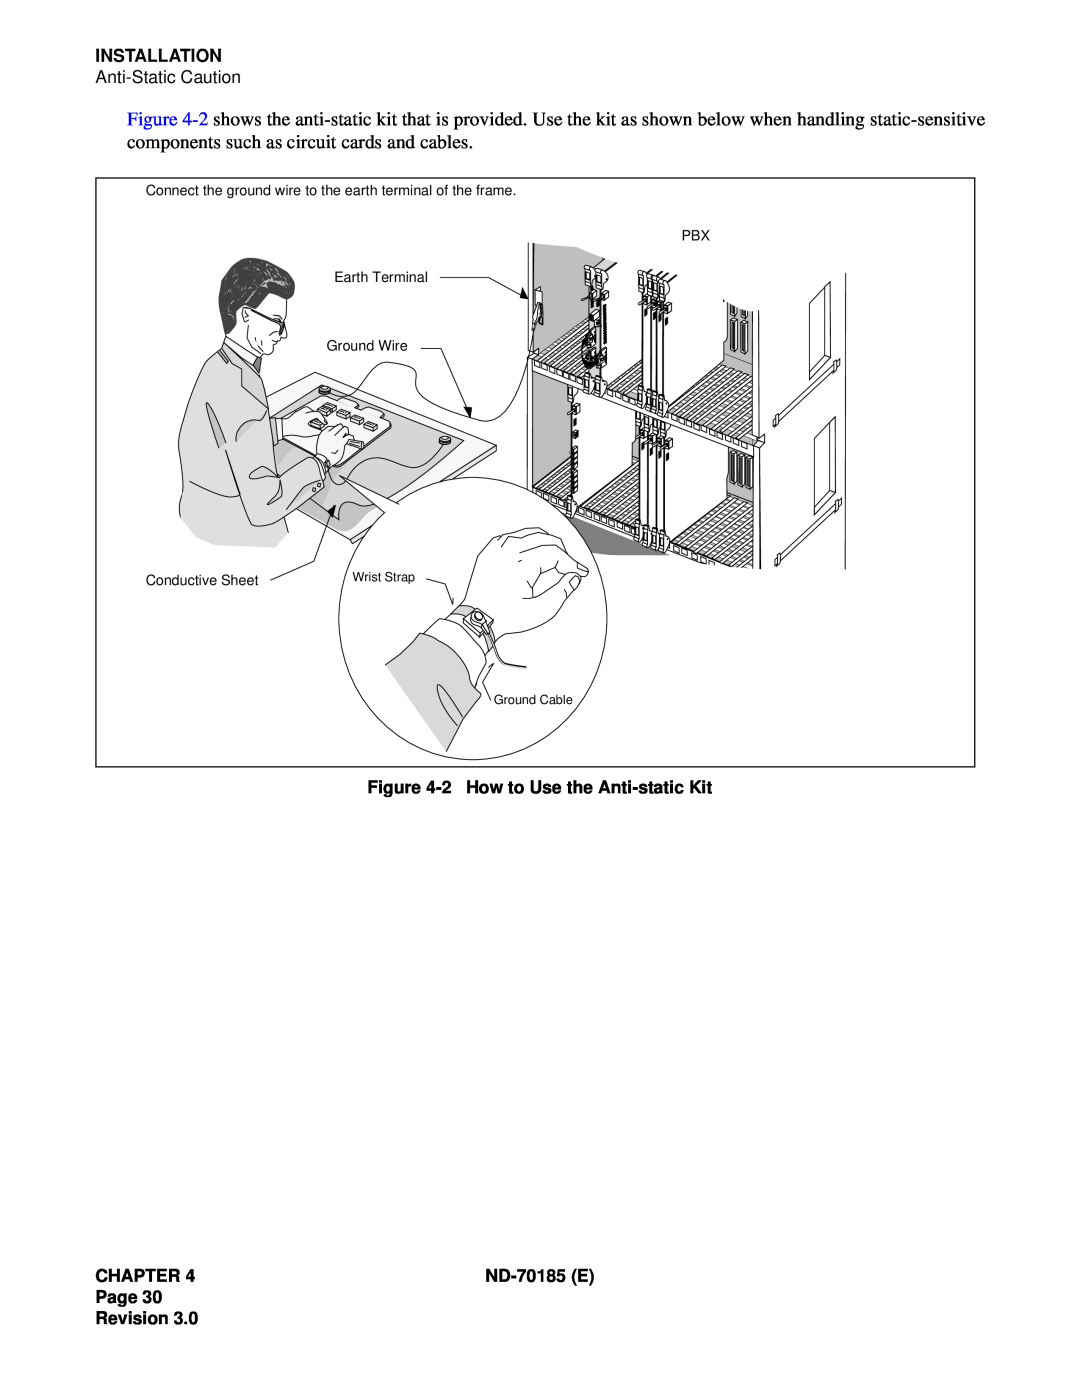 NEC NEAX2400 system manual Installation, 2How to Use the Anti-staticKit, Chapter, ND-70185E, Page Revision 